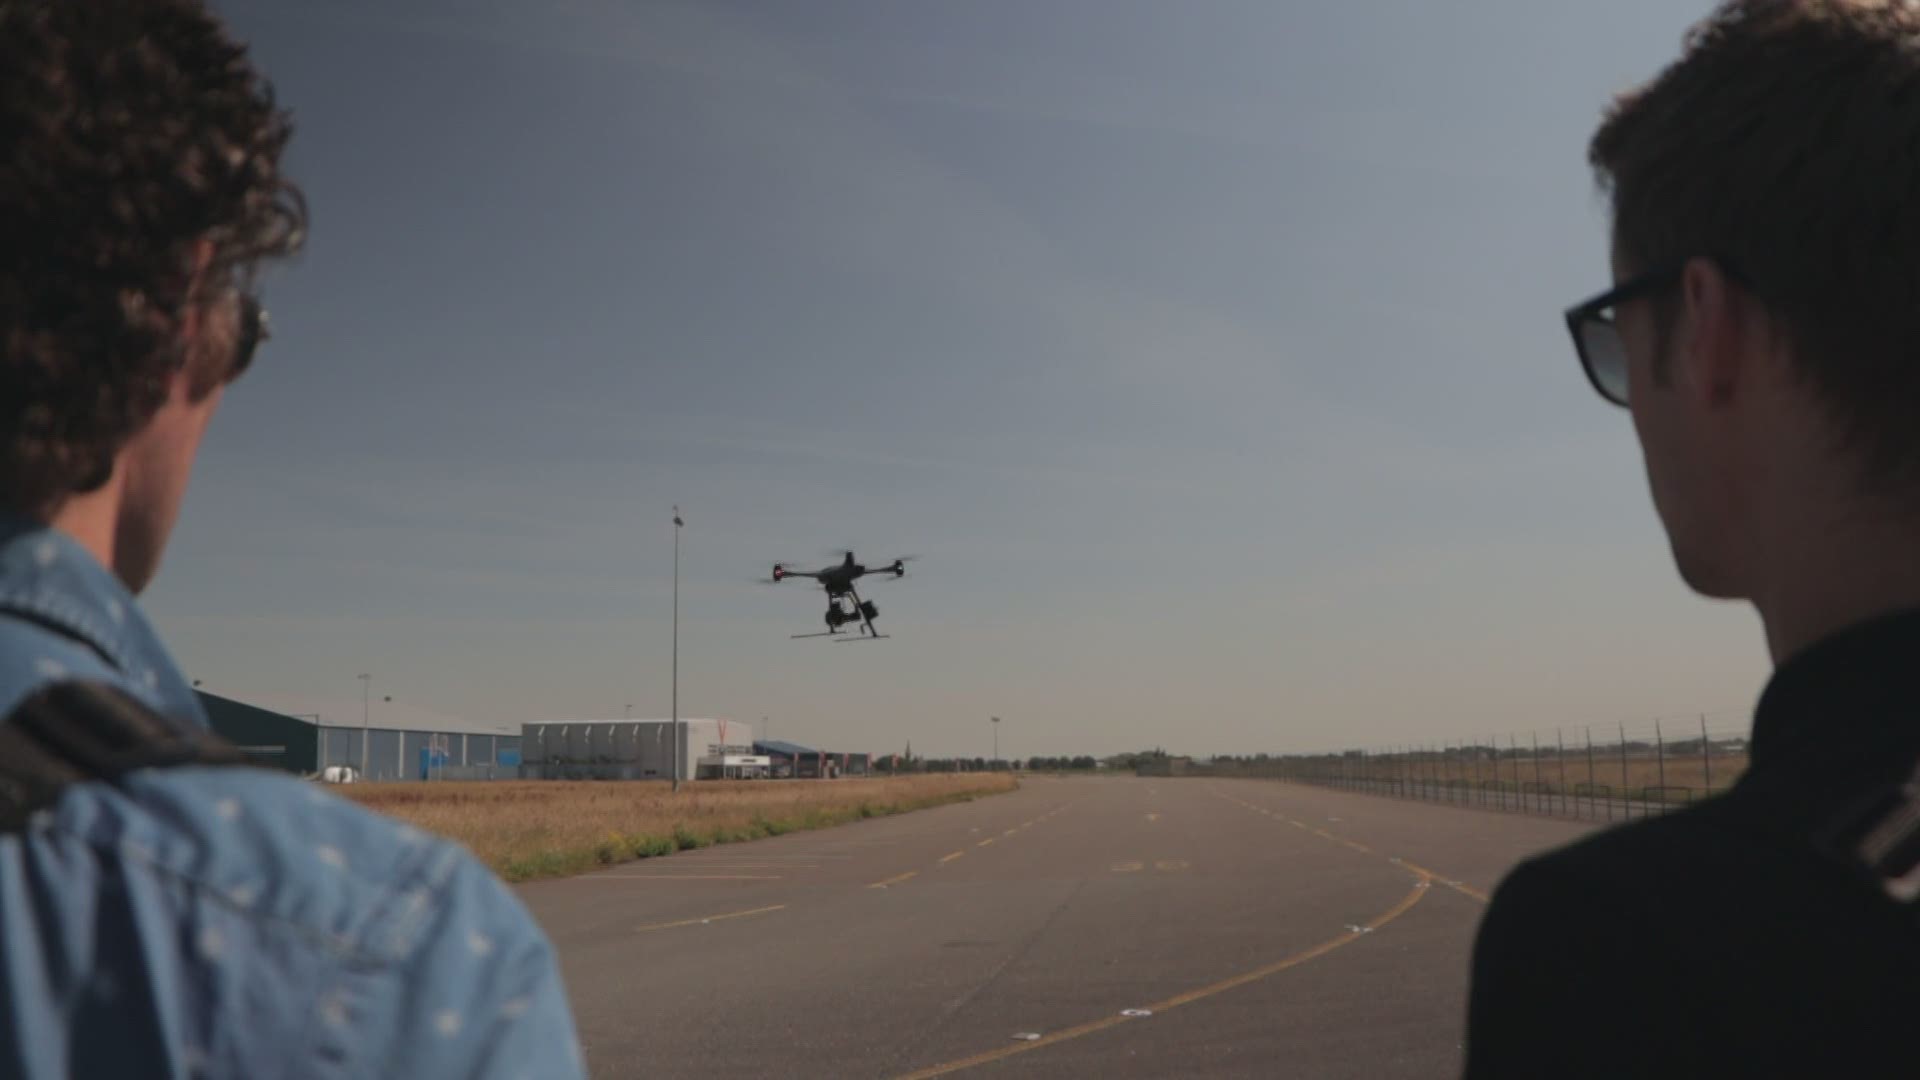 Aquiline Drones is offering a program called Flight to the Future that will train students to be licensed drone operators.